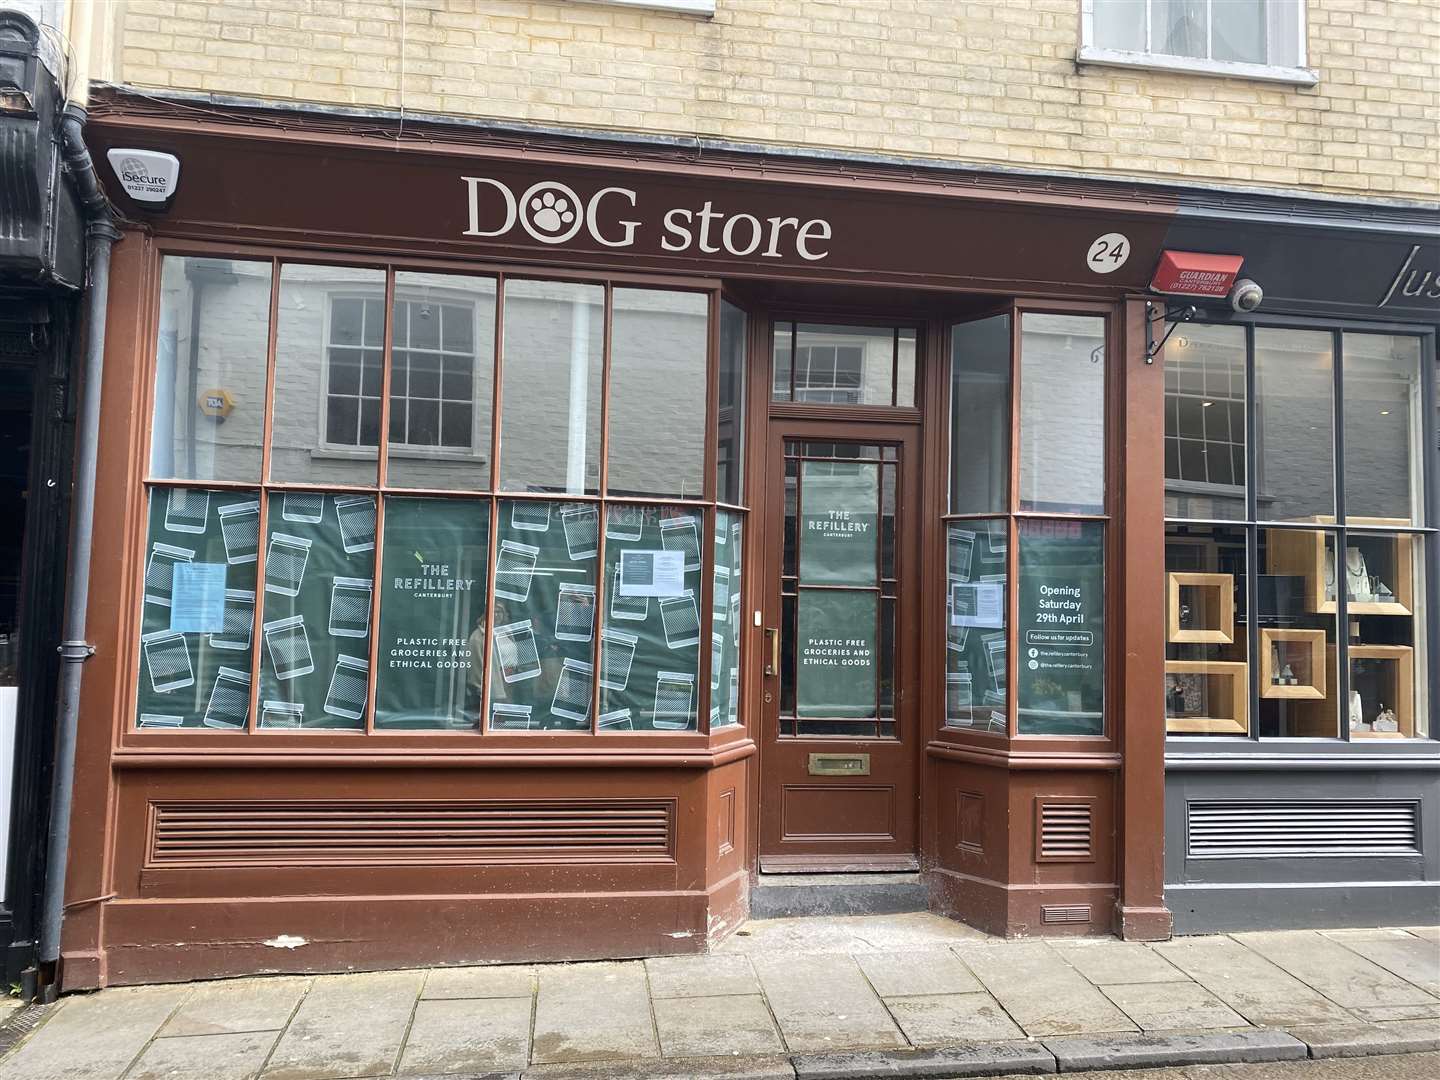 Signage has gone up marking the opening of the store